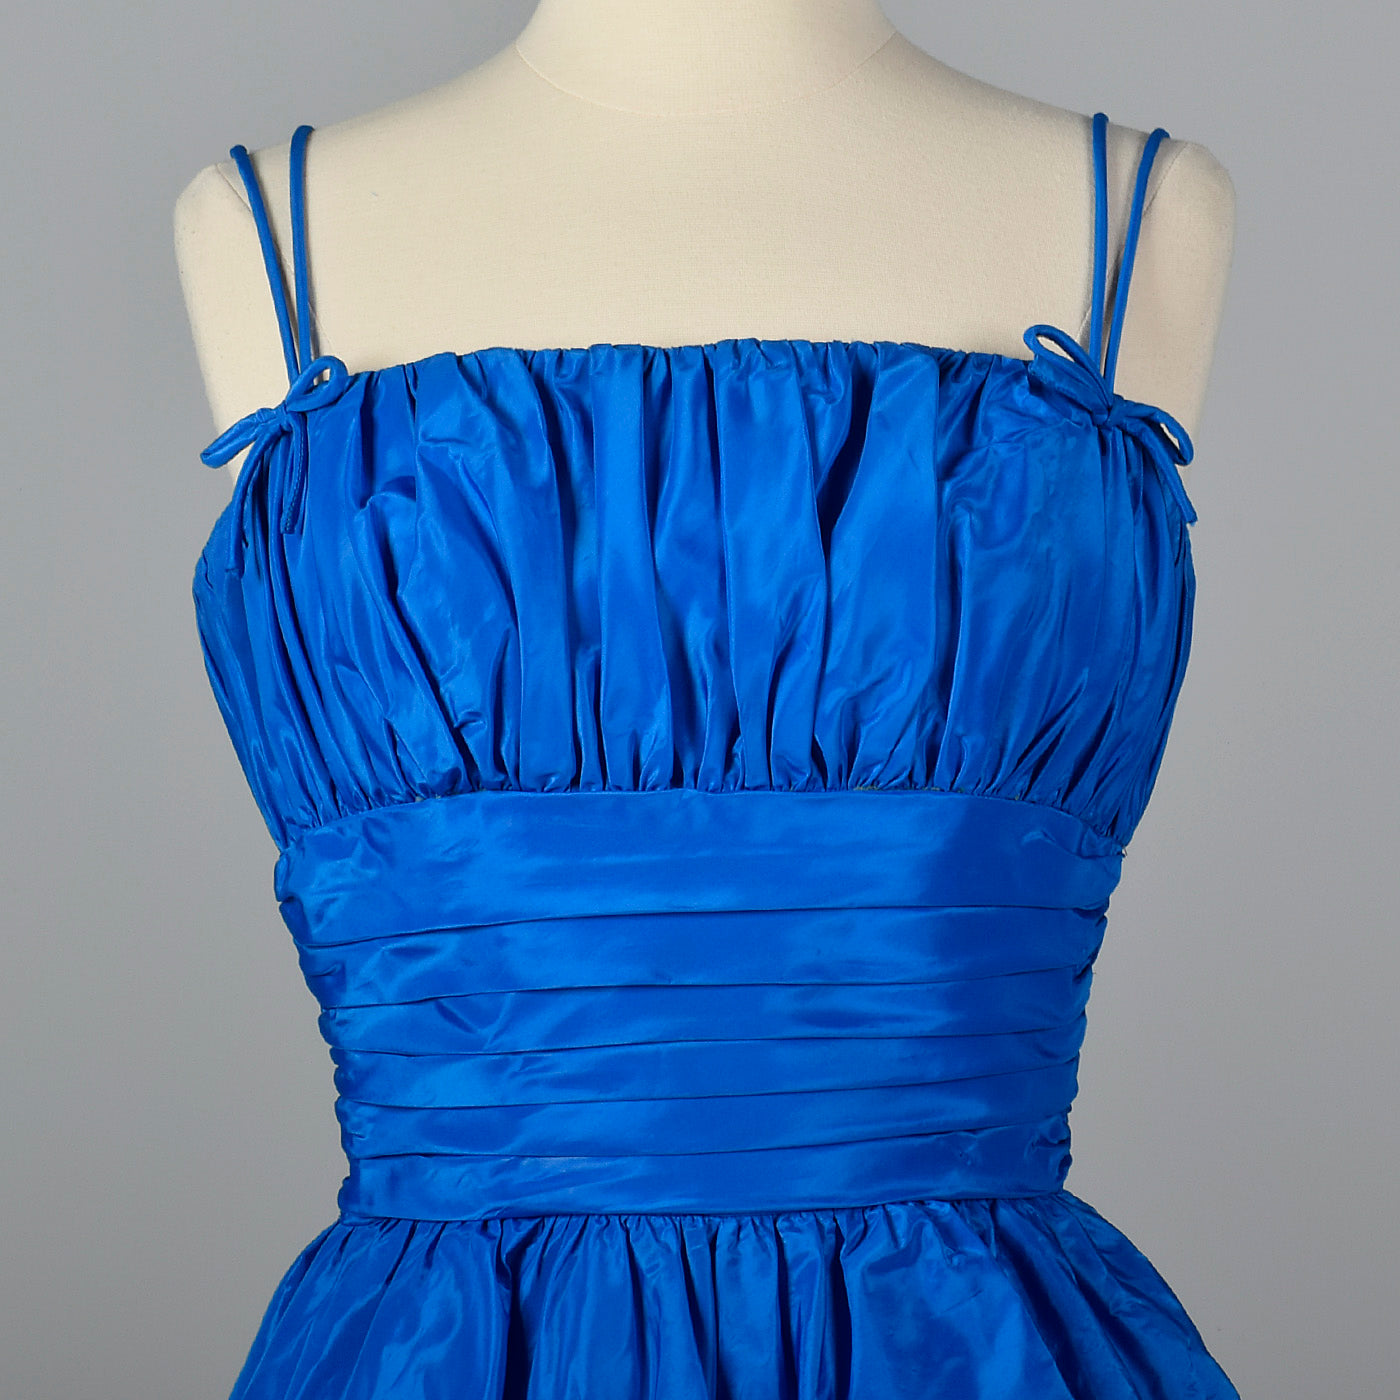 1950s Electric Blue Party Dress with Bubble Skirt